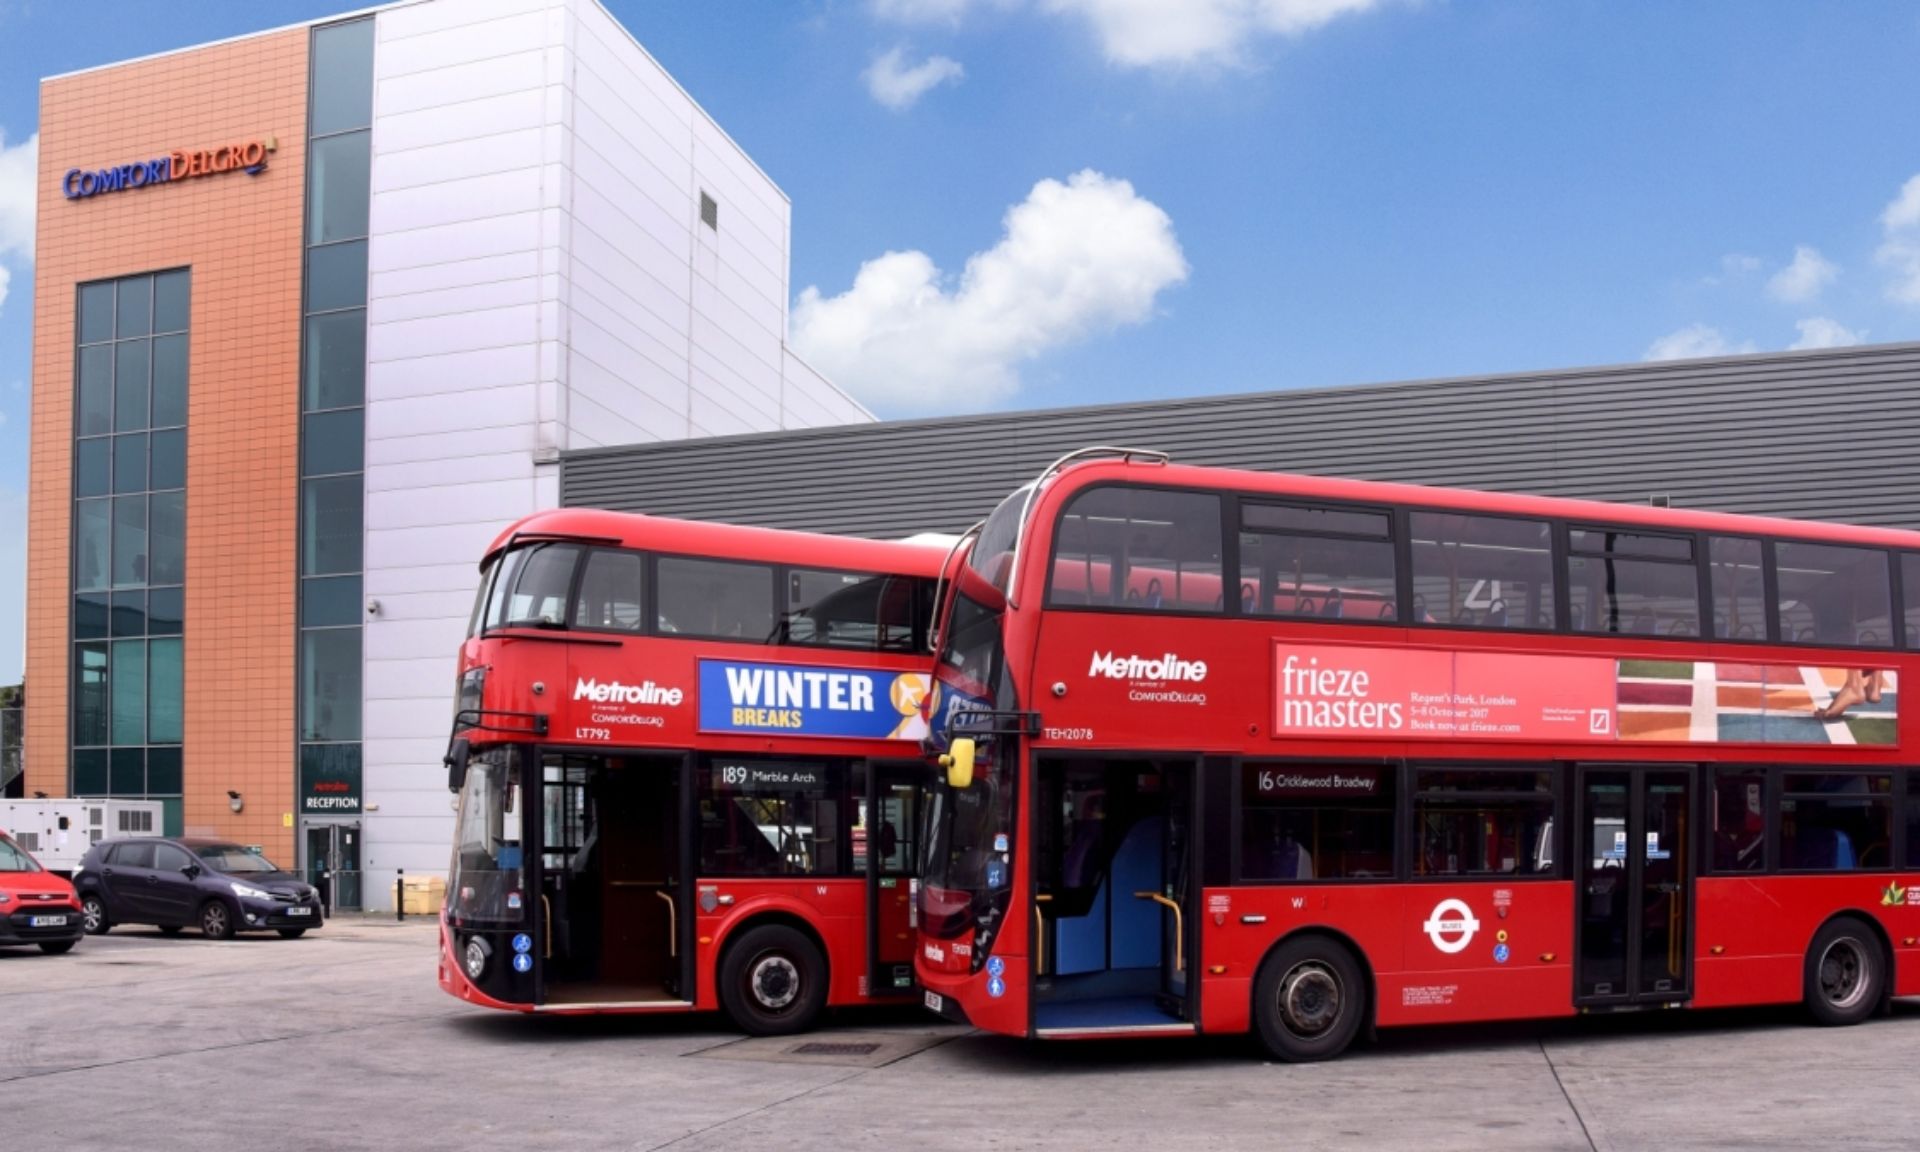 ComfortDelGro operates Metroline. Metroline is the fourth largest scheduled bus operator in London and operates about 17% of the city's scheduled bus services